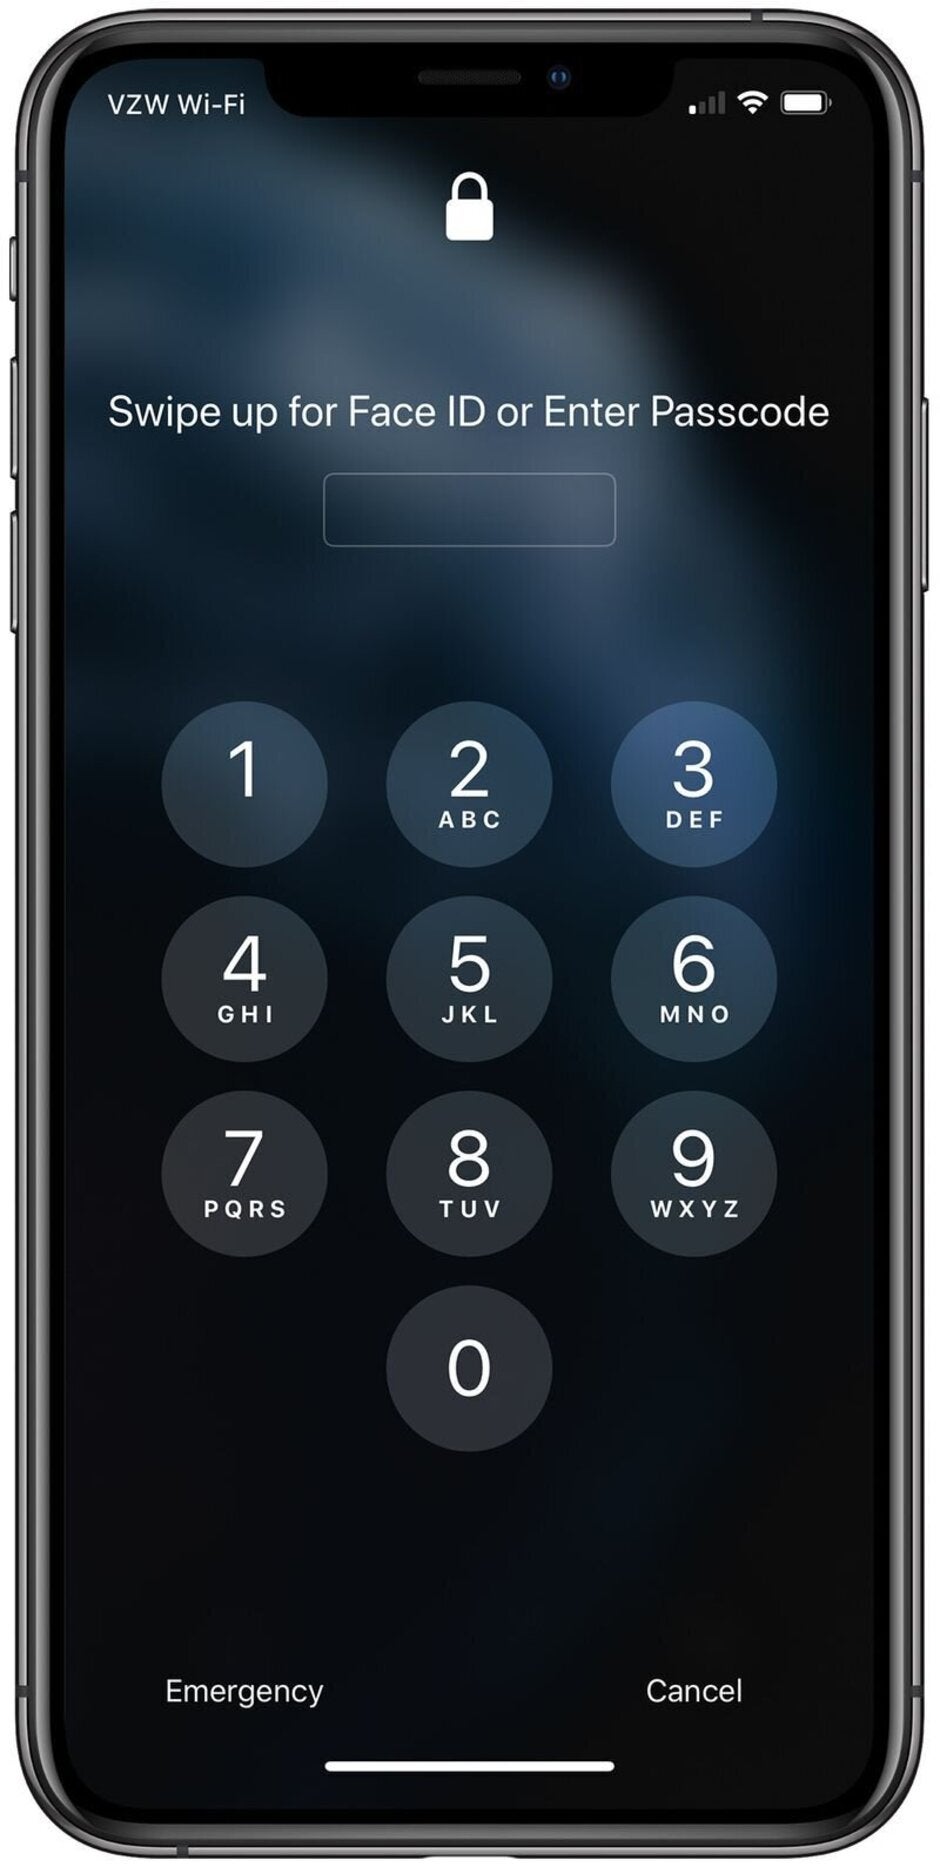 The passcode interface will pop up when a user is wearing a mask - iPhone users can now skip Face ID when wearing a mask